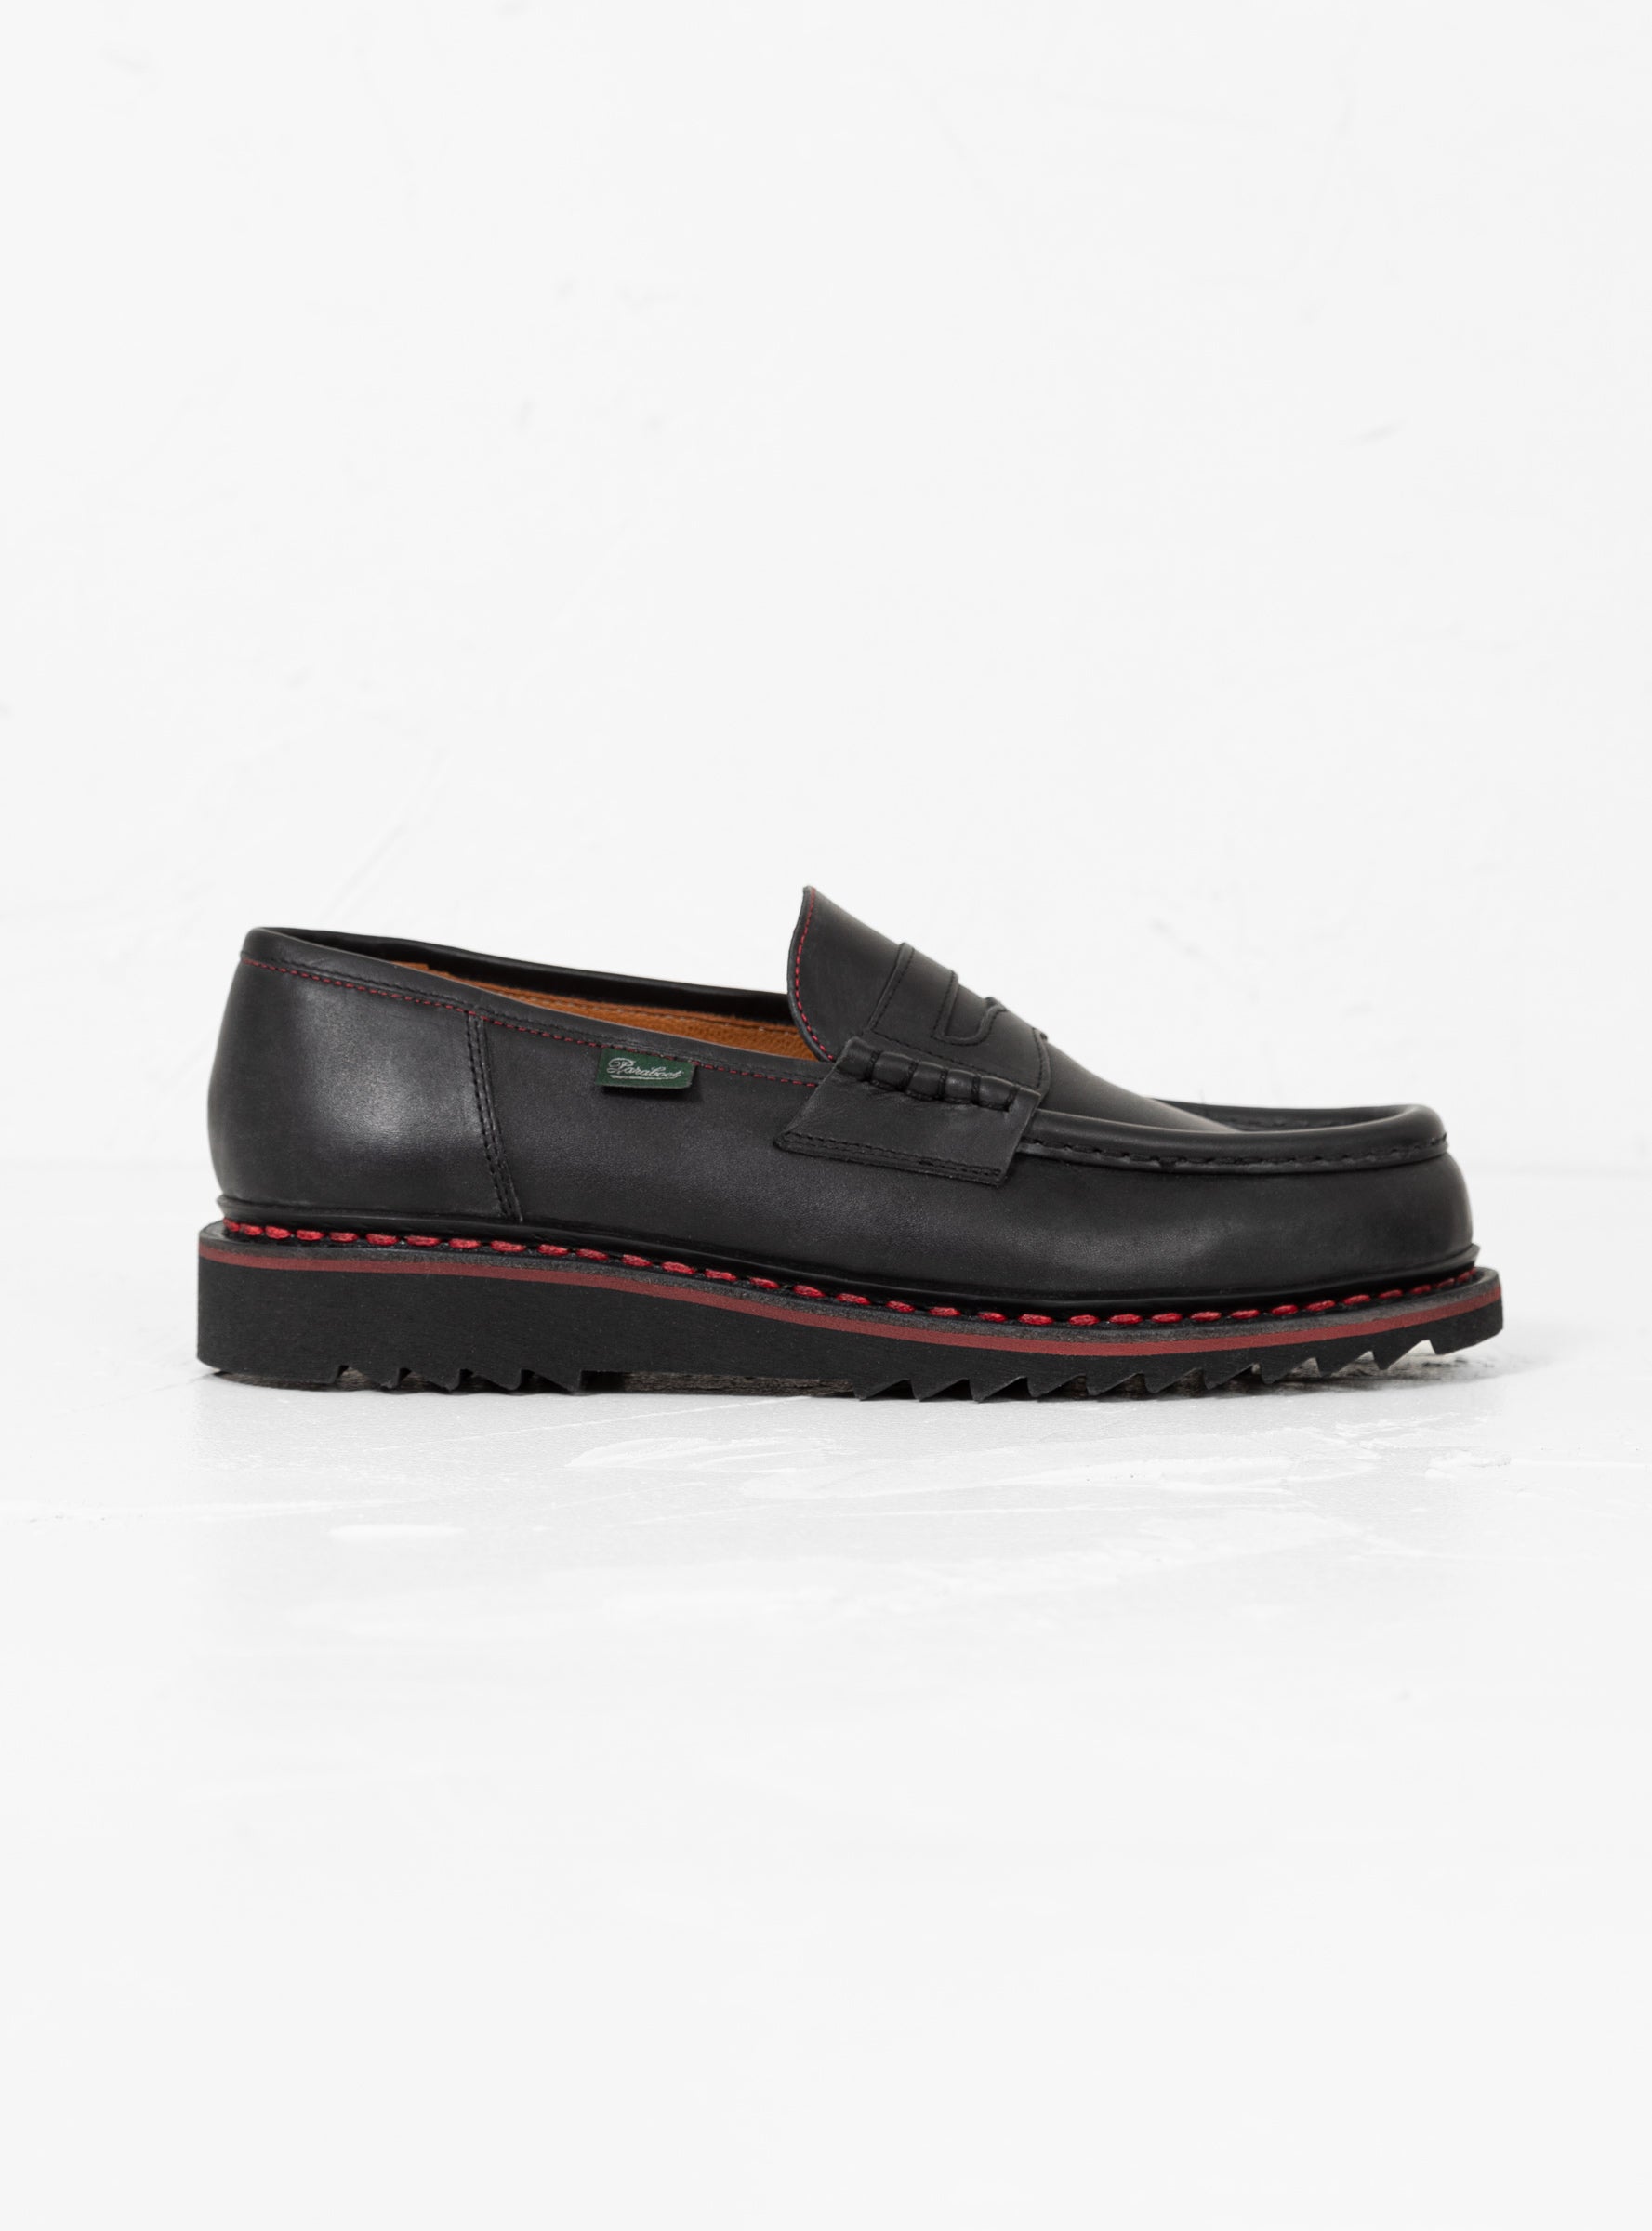 Paraboot Paraboot Reims Loafers Black & Red - Size: UK 9